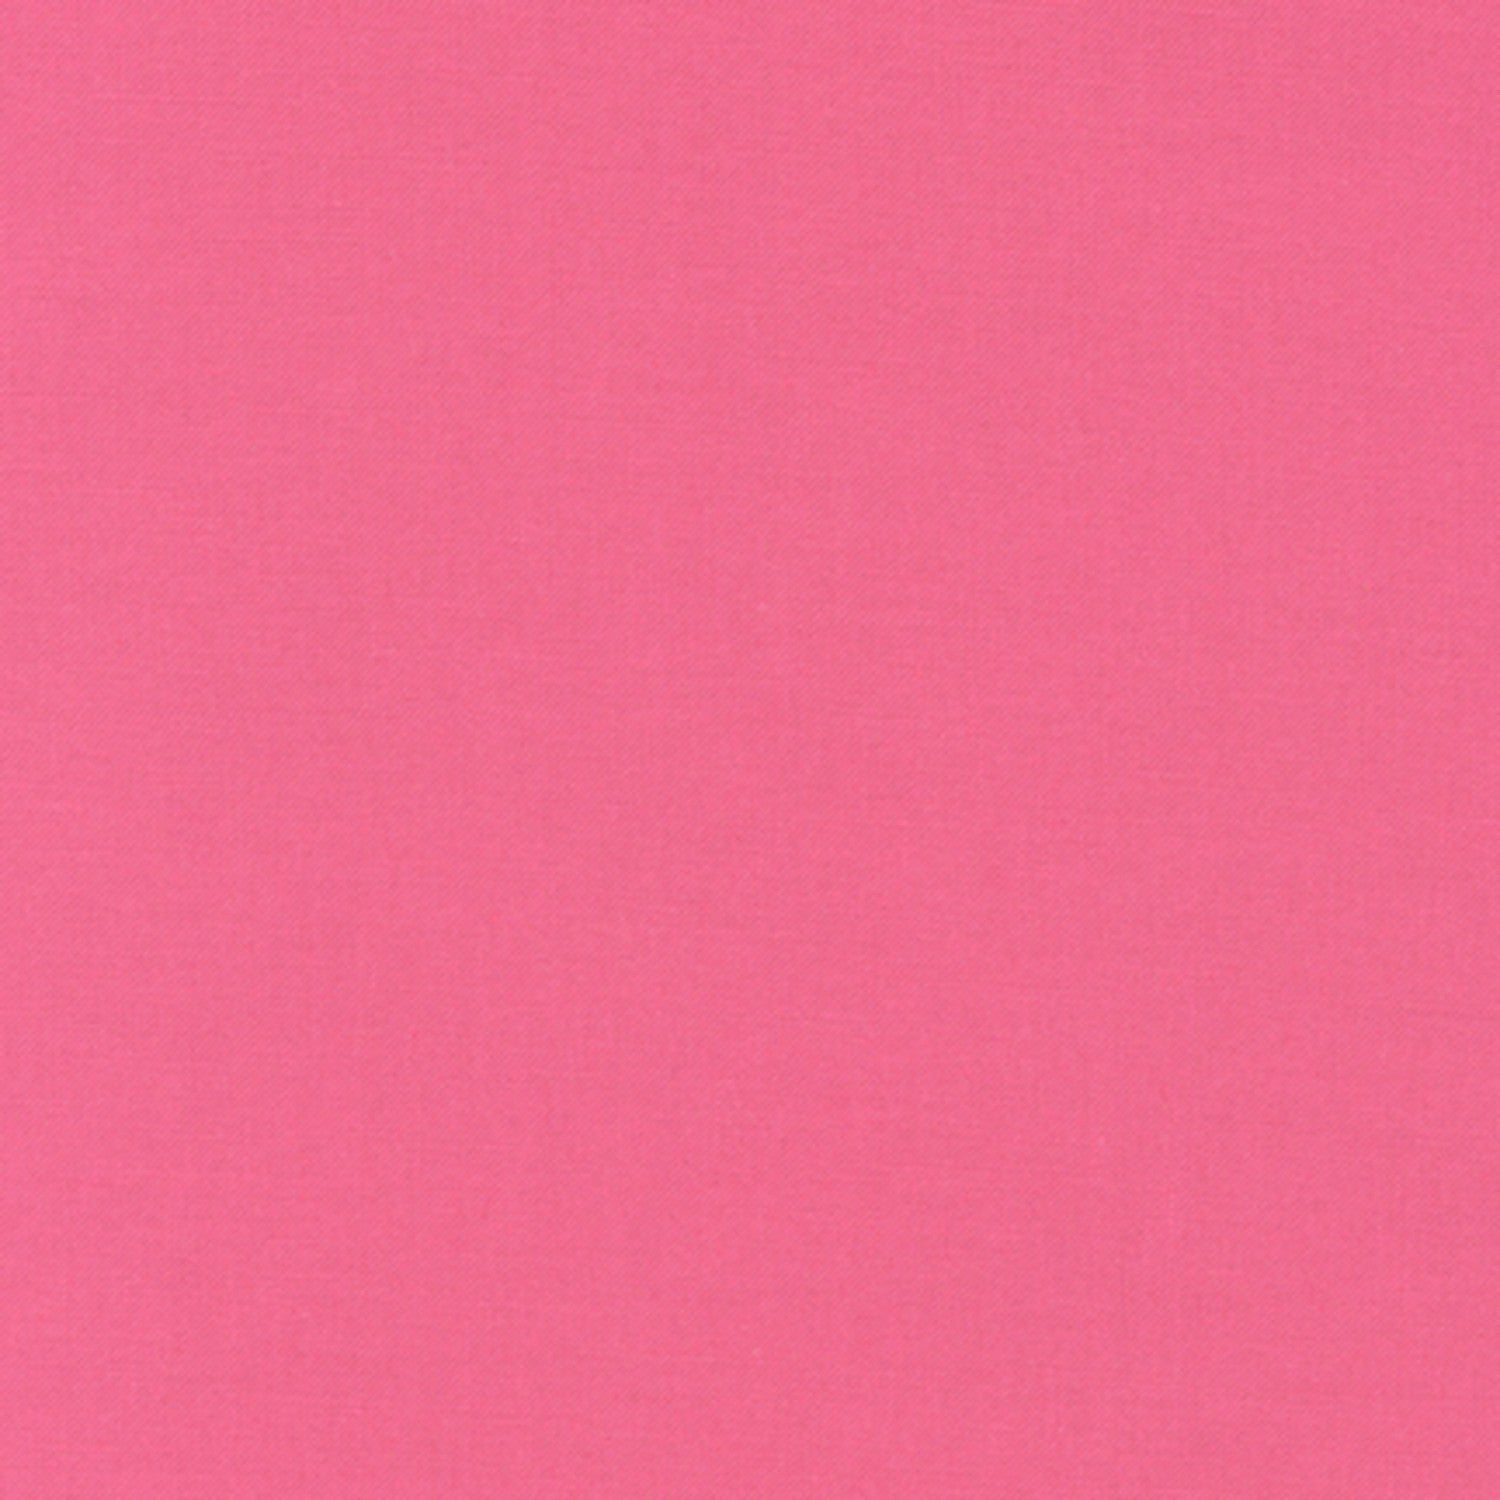 Kona Cotton Solids Camellia fabric thumbnail image for true color reference